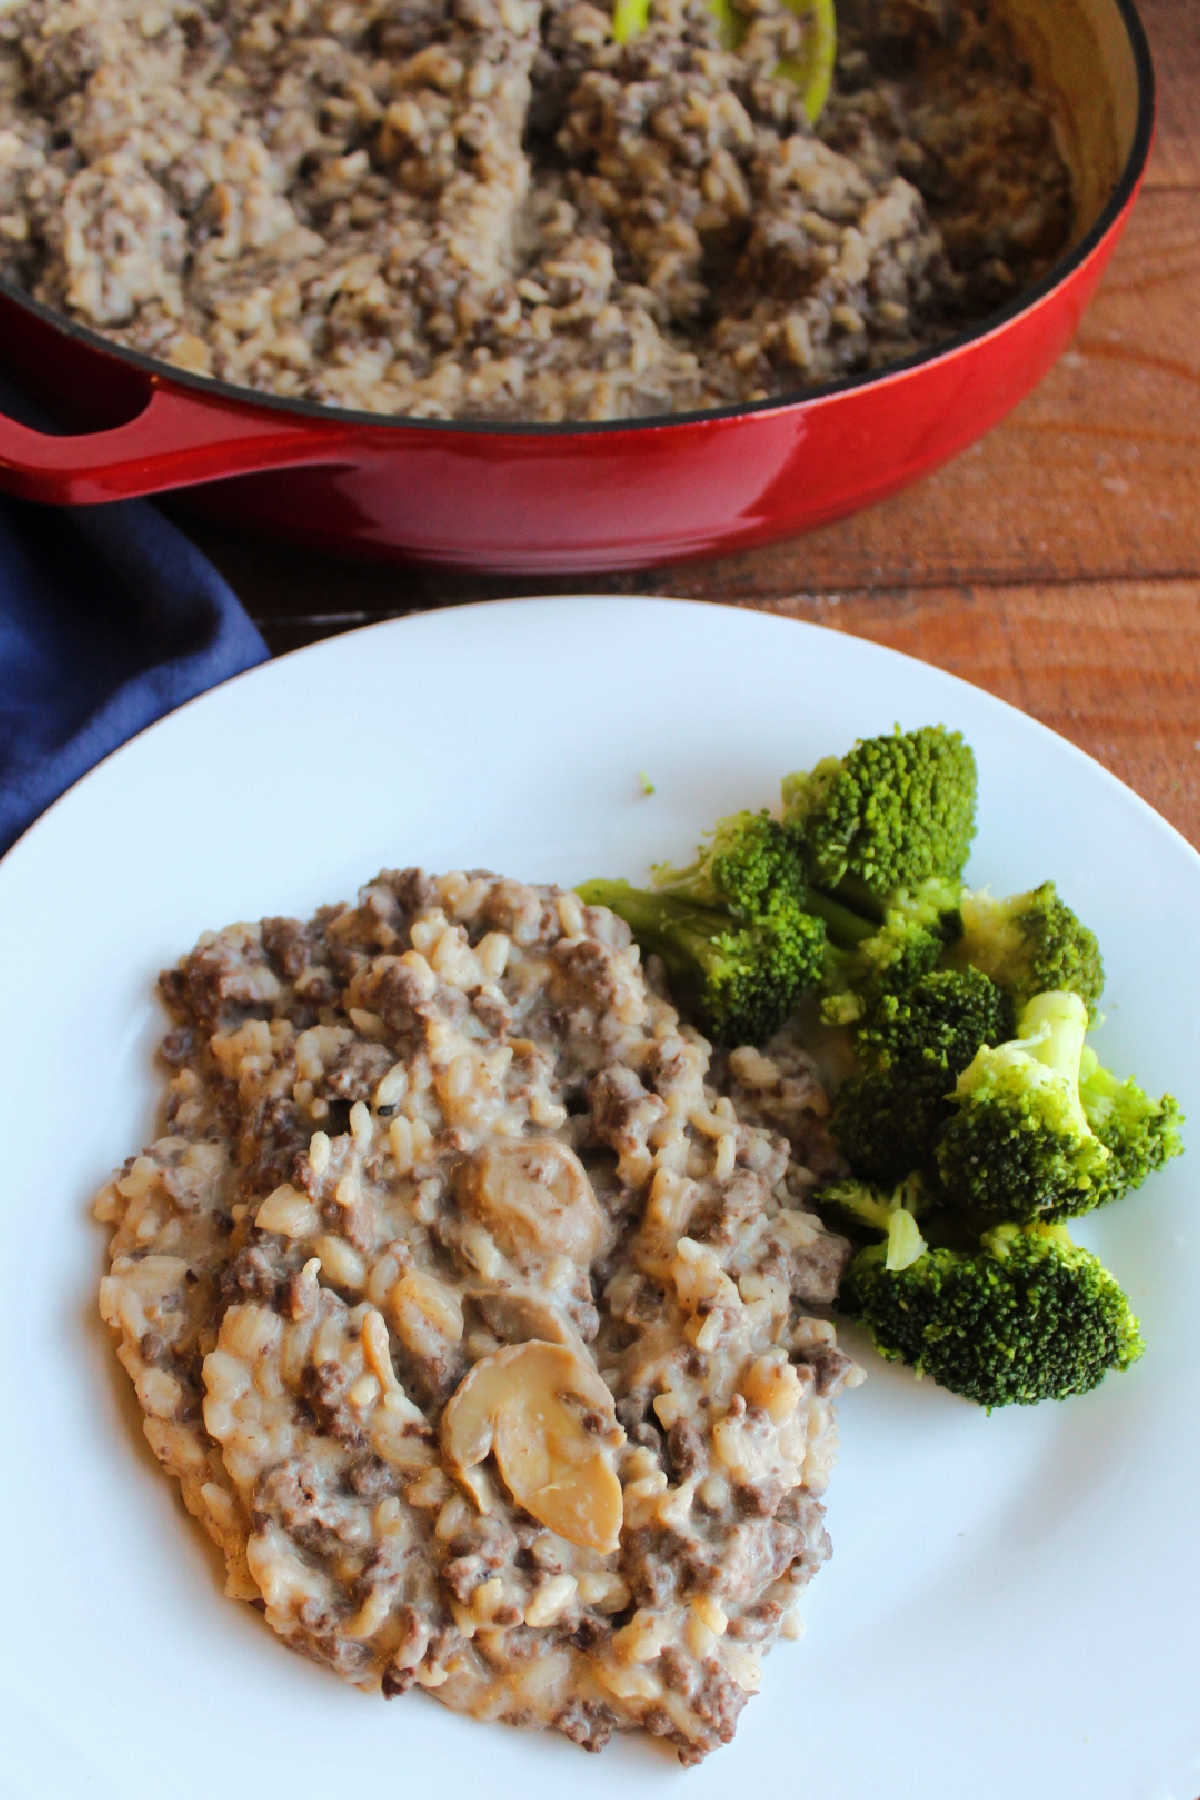 Dinner plate with creamy rice mixture and steamed broccoli with the cast iron pan containing the rest of the rice mixture in the background.